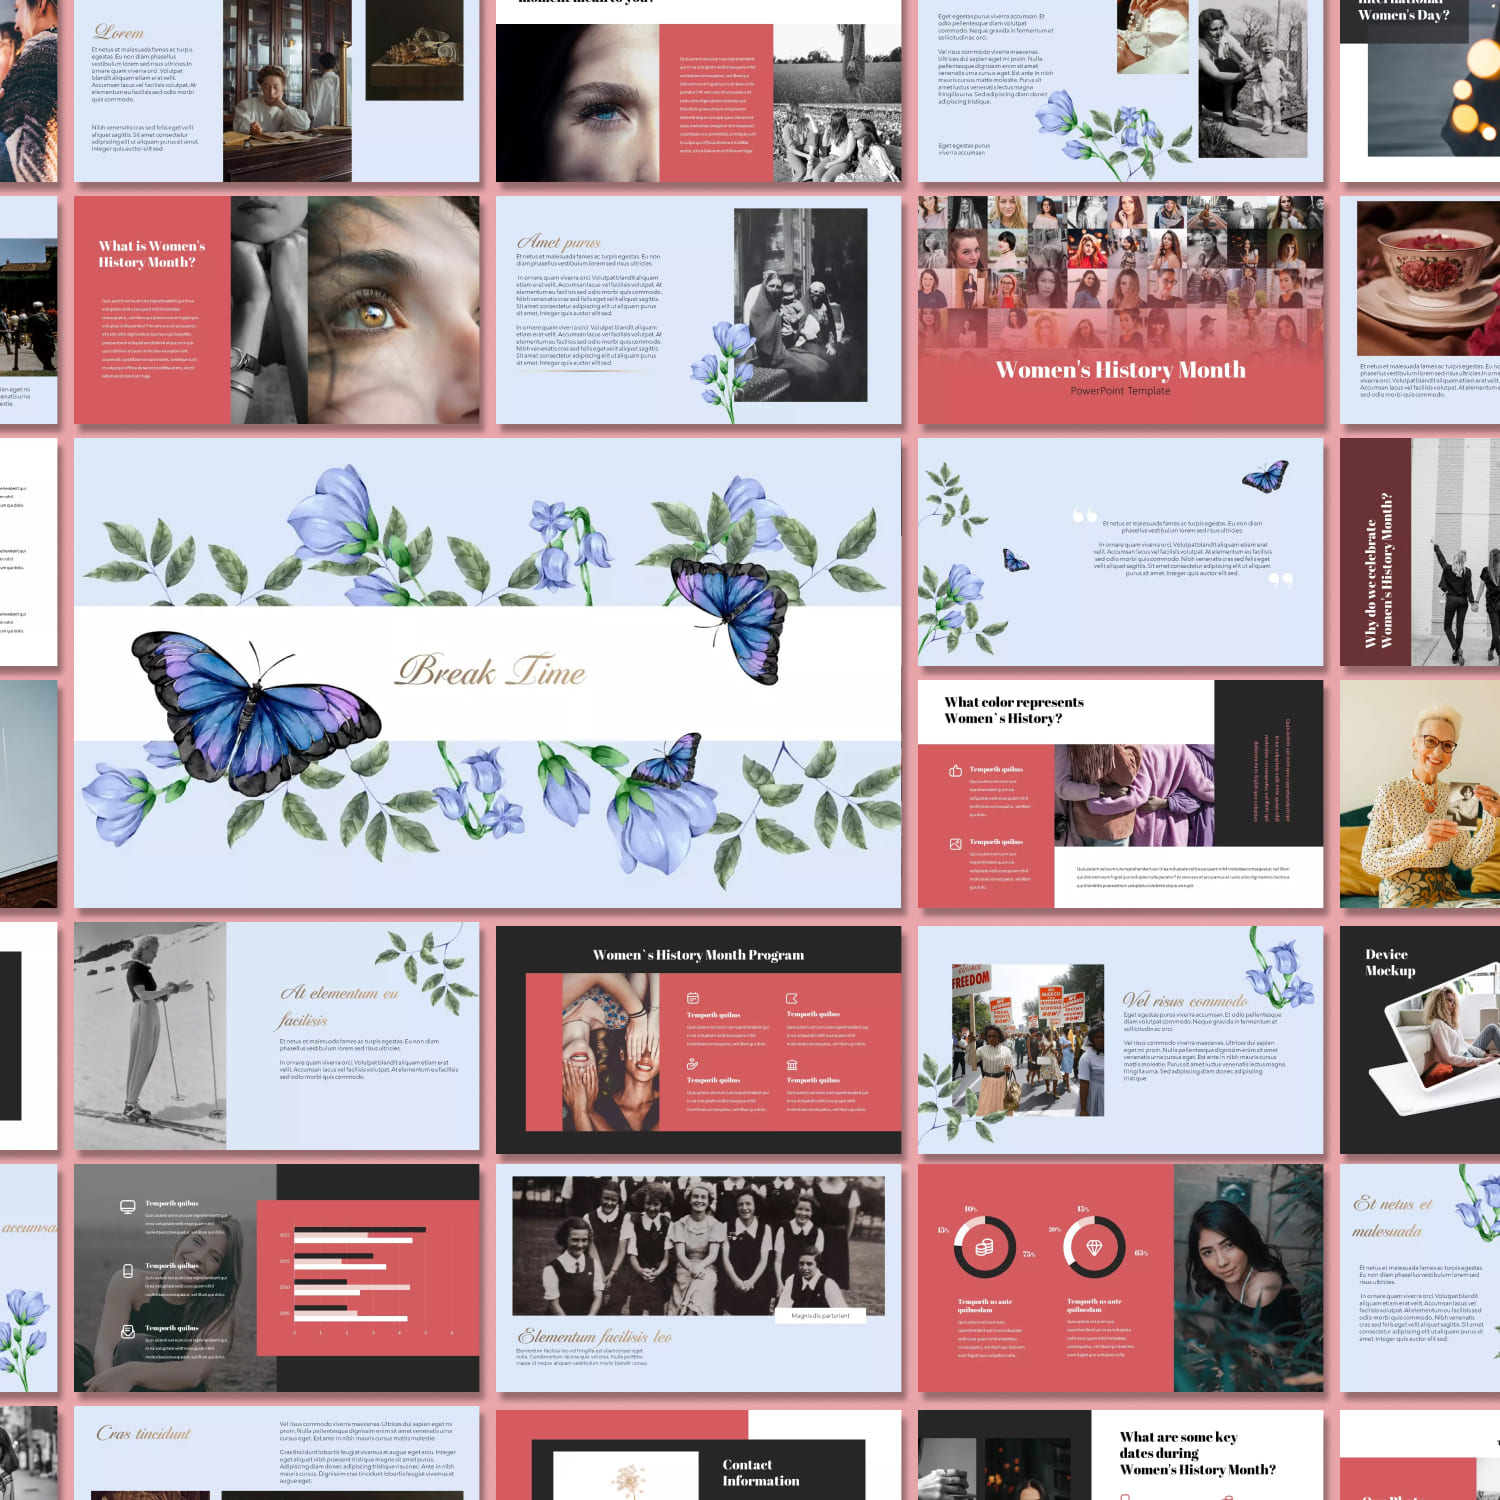 Women’s History Month Powerpoint Templates Bundle Cover.